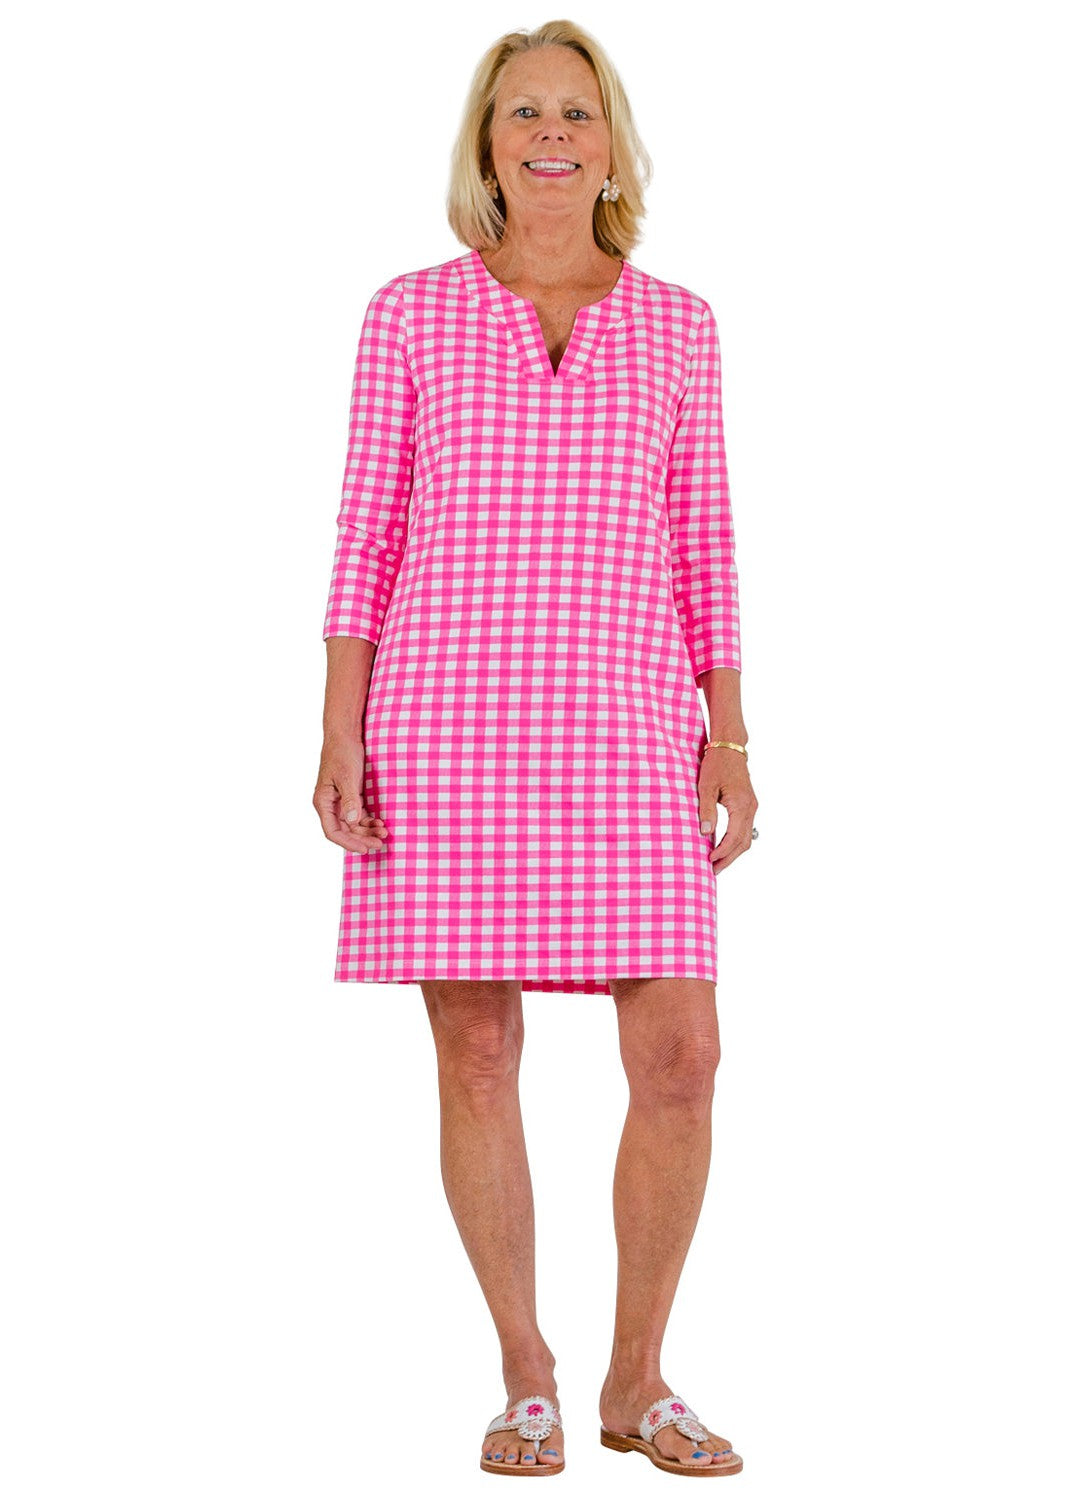 4- Gingham Check Pink